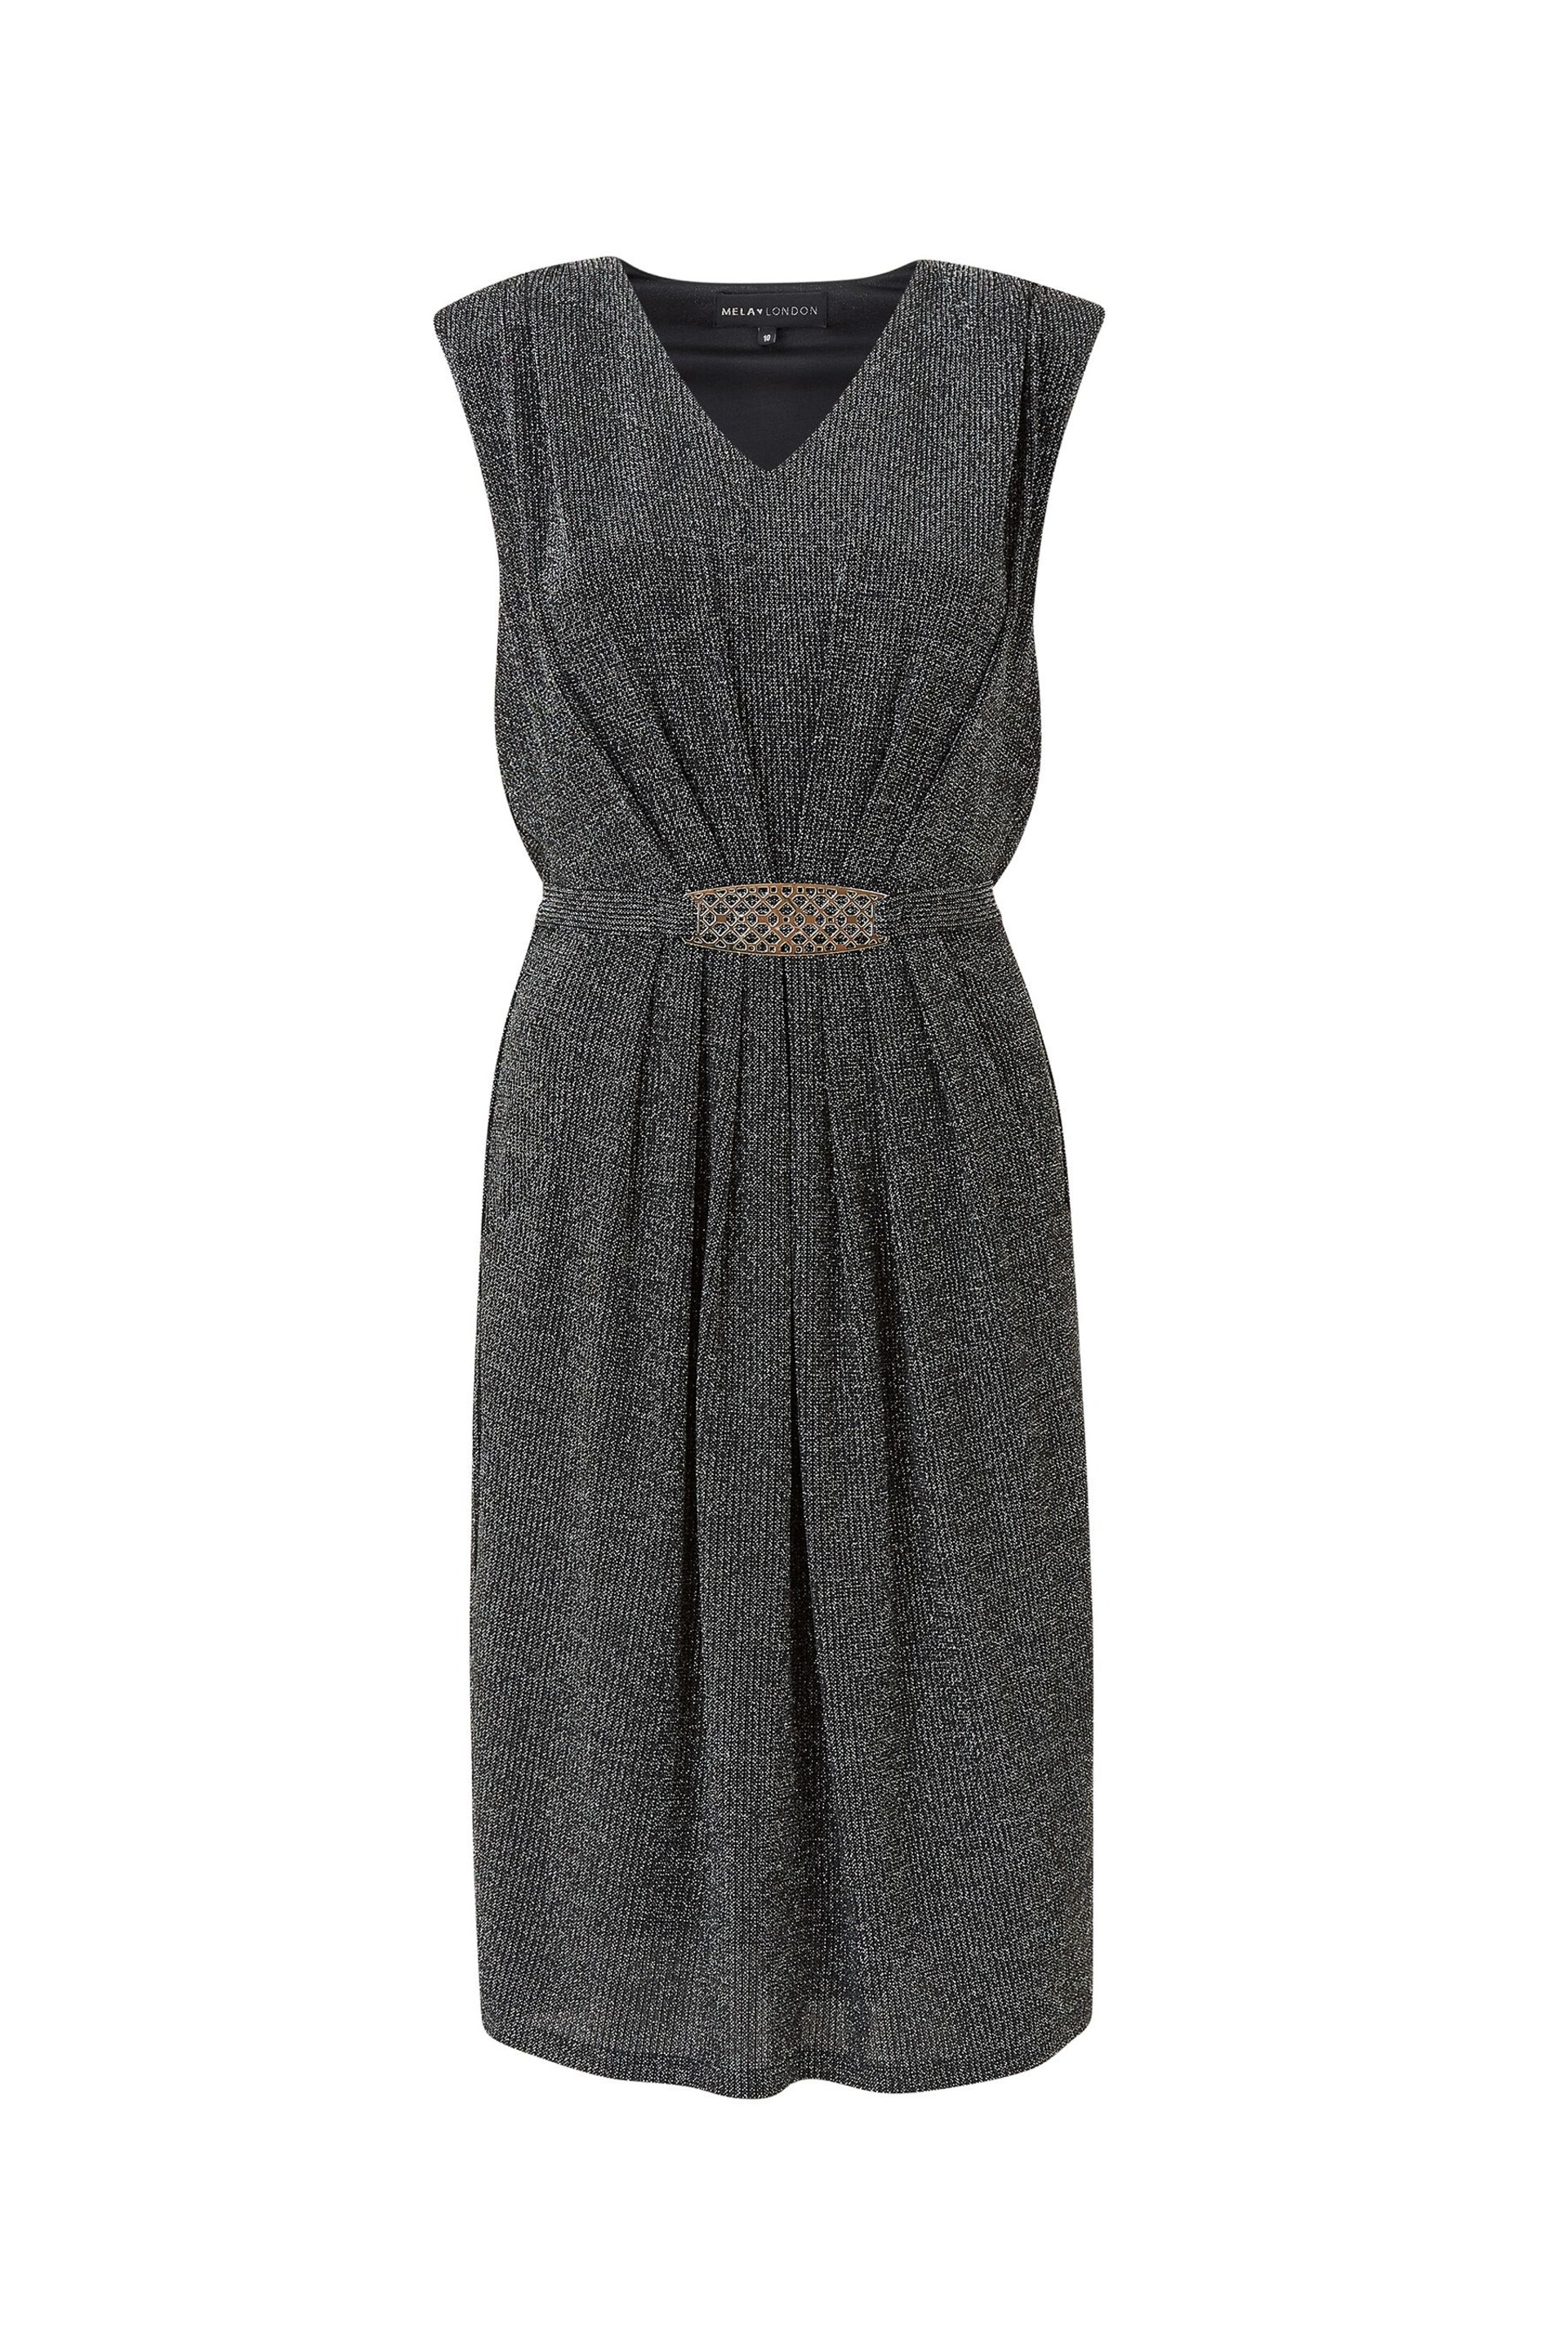 Mela Silver Belted Bodycon Dress - Image 4 of 4